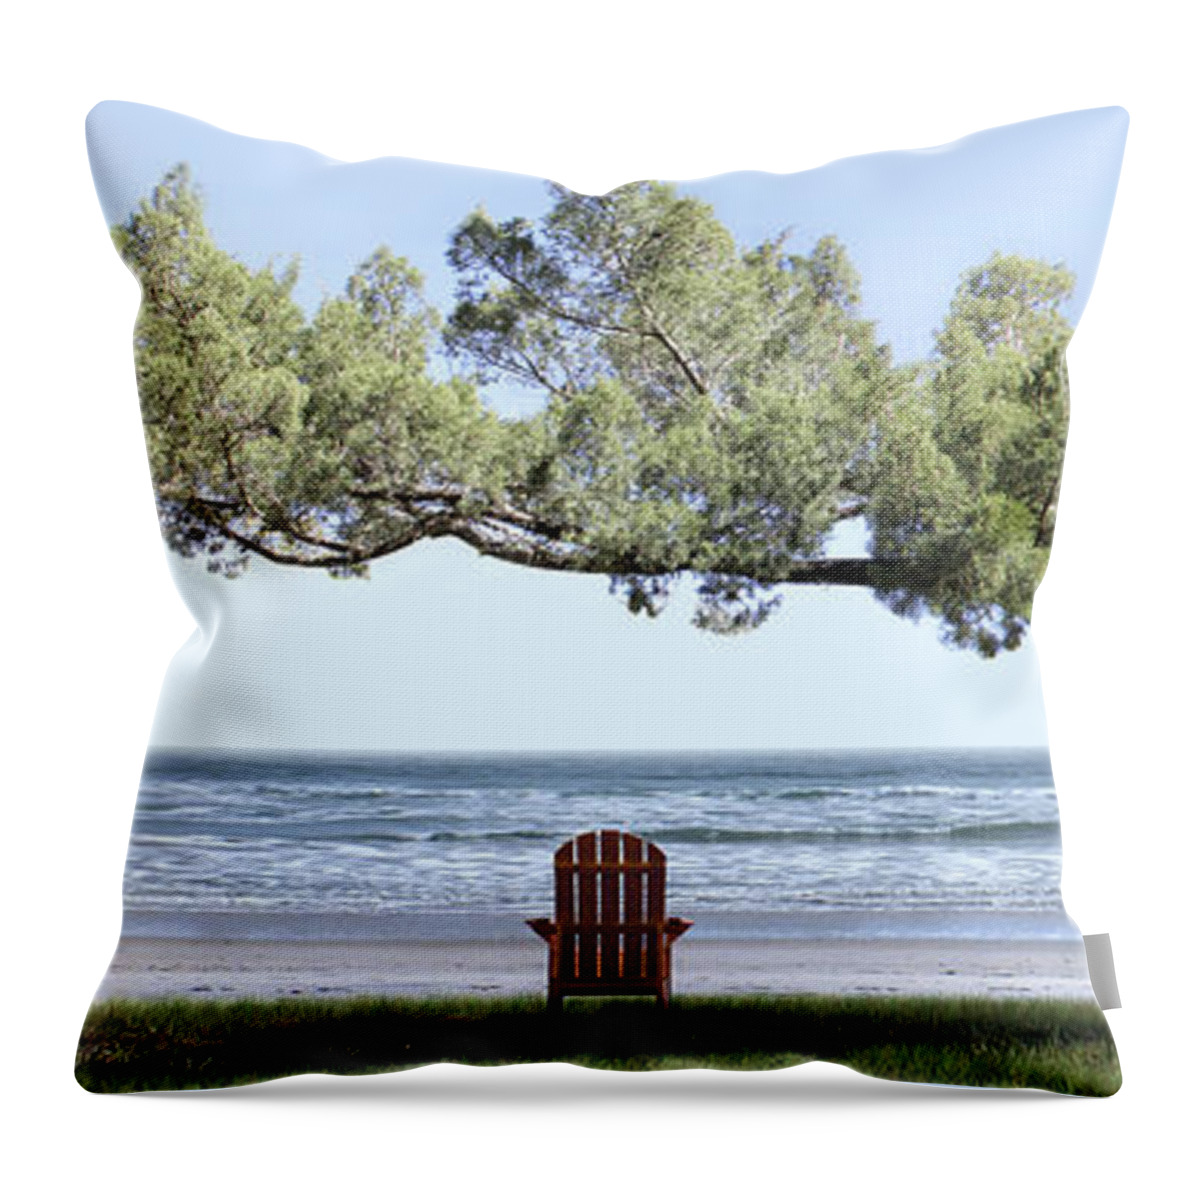 Shade Tree Throw Pillow featuring the photograph Shade Tree Panoramic by Mike McGlothlen